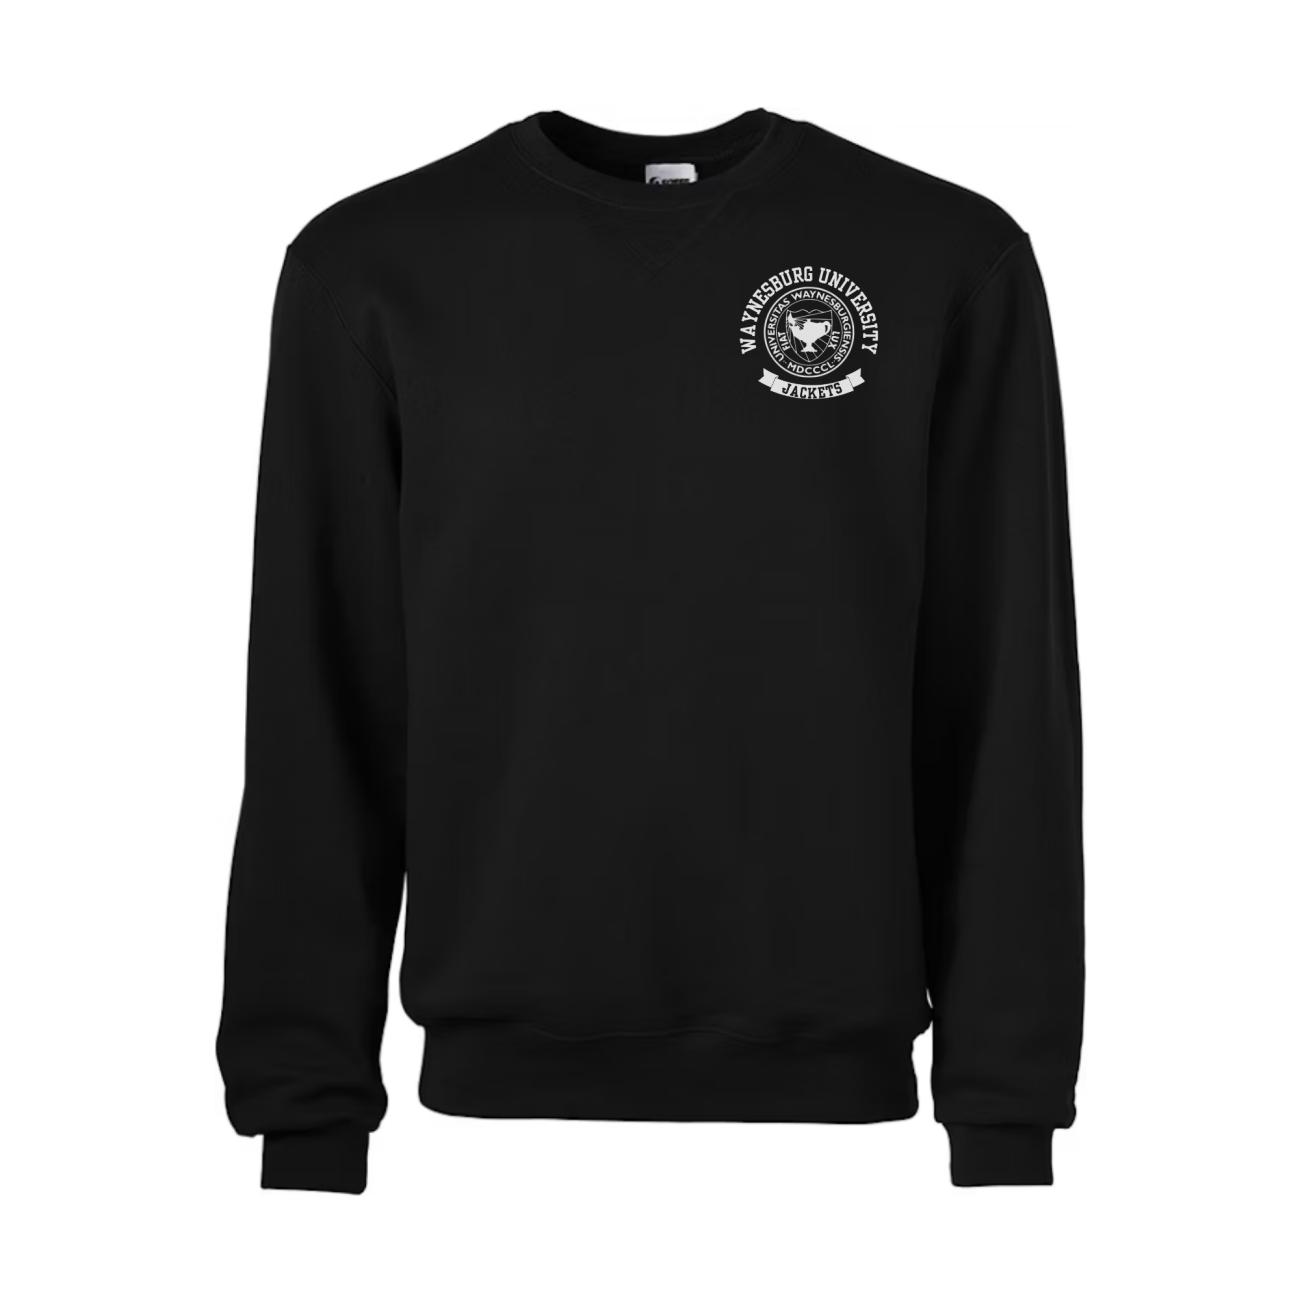 Black long sleeve shirt with the Waynesburg University Fiat Lux Logo, Waynesburg University, and Jackets printed in the left chest pocket area of the shirt